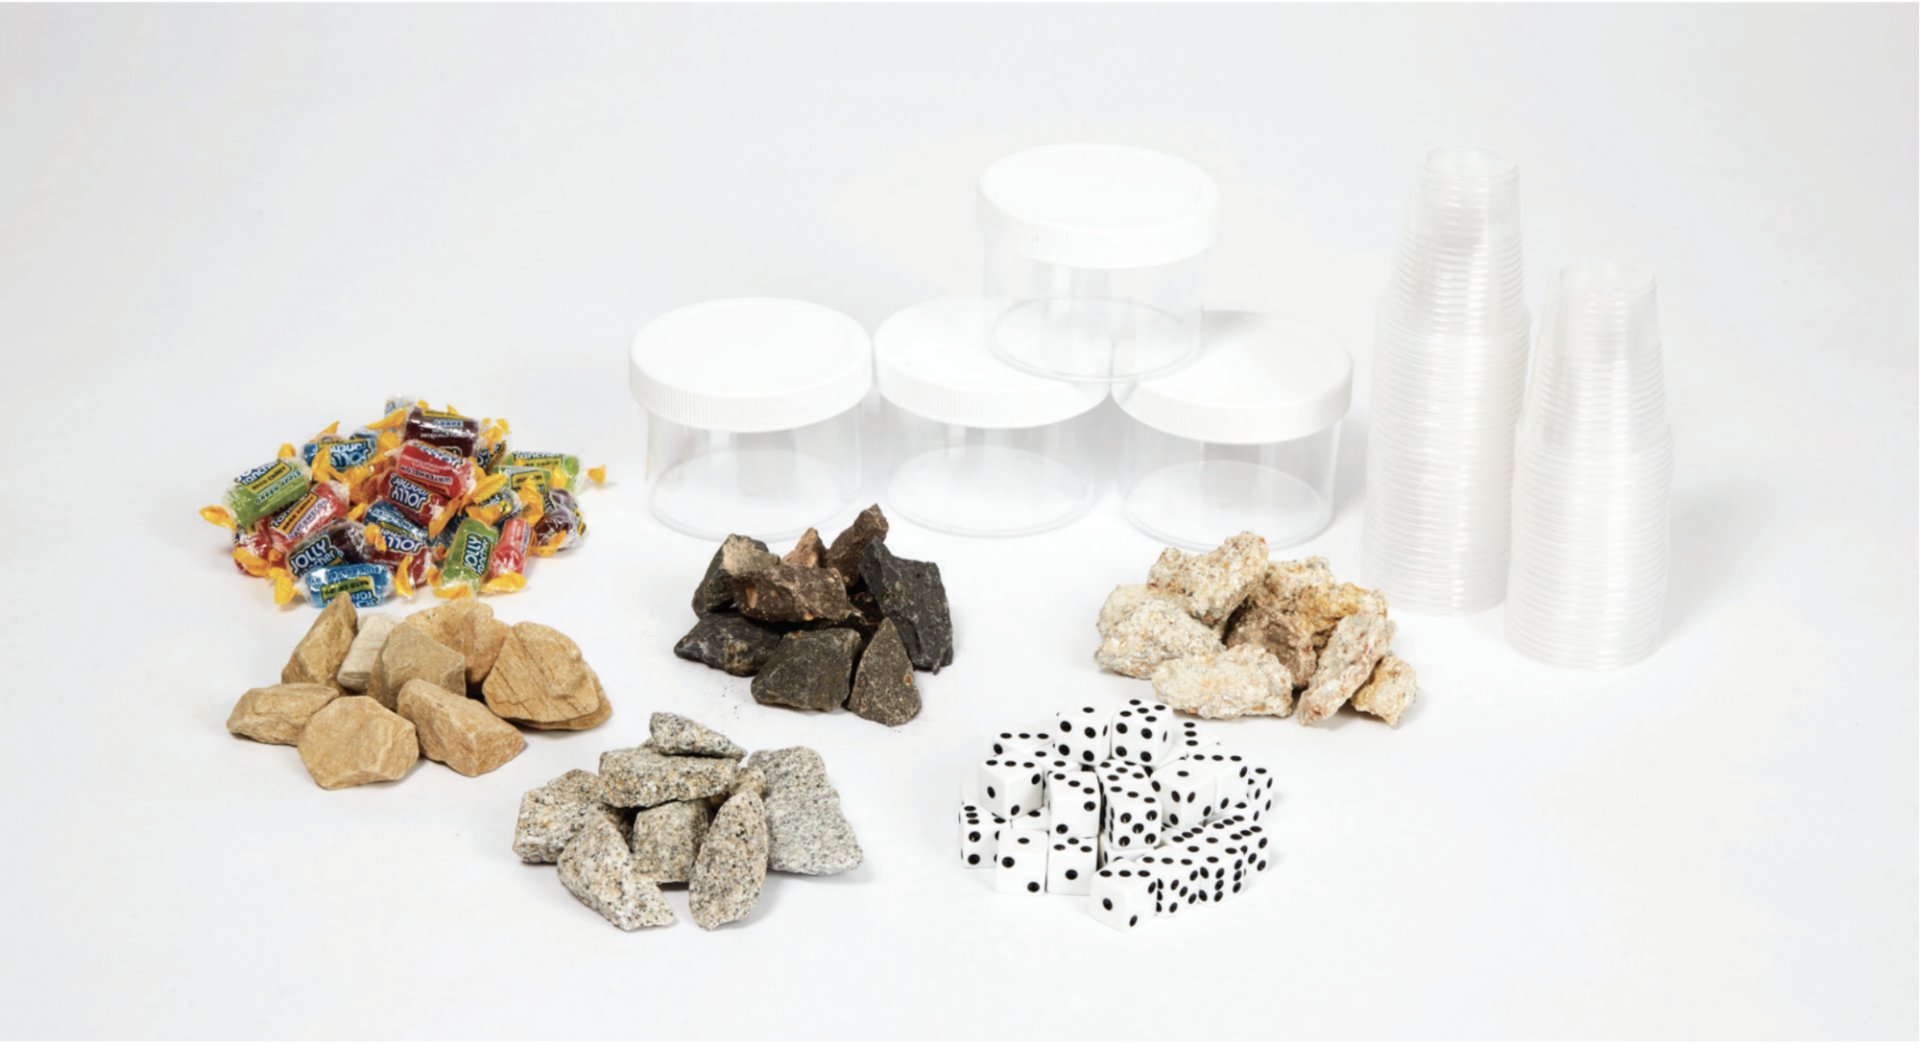 Several groups of materials, including candies, various rocks, clear plastic containers, and stacked plastic cups, arranged on a white surface.